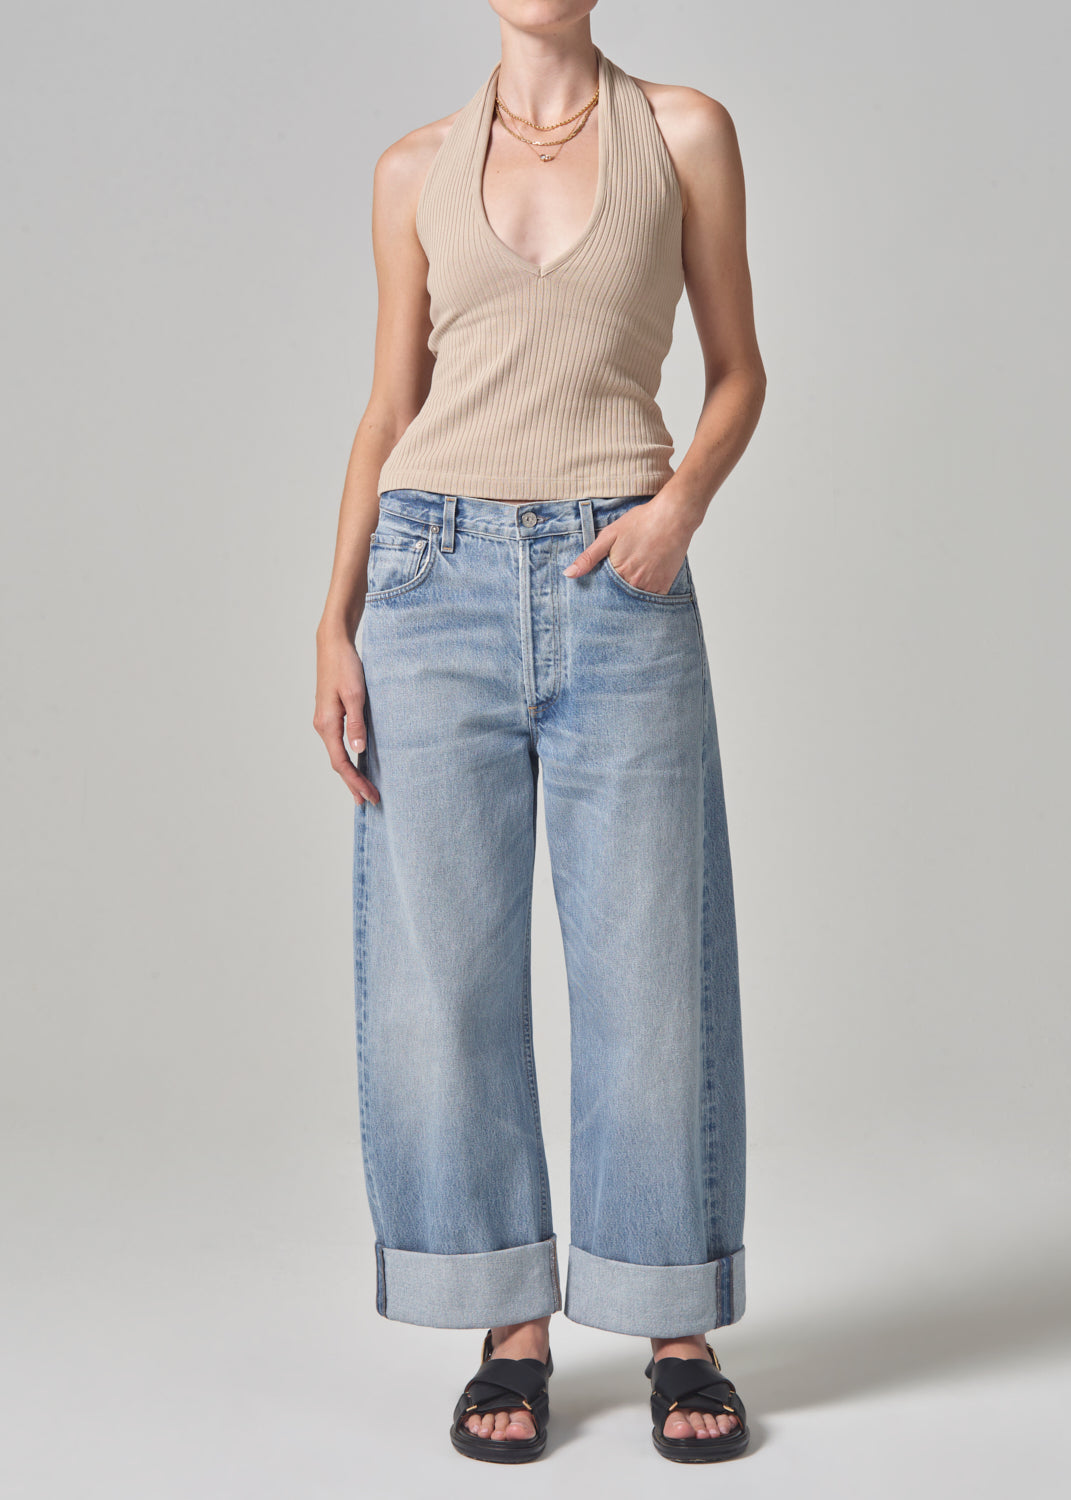 Ayla Baggy Cuffed Crop in Gemini – Citizens of Humanity